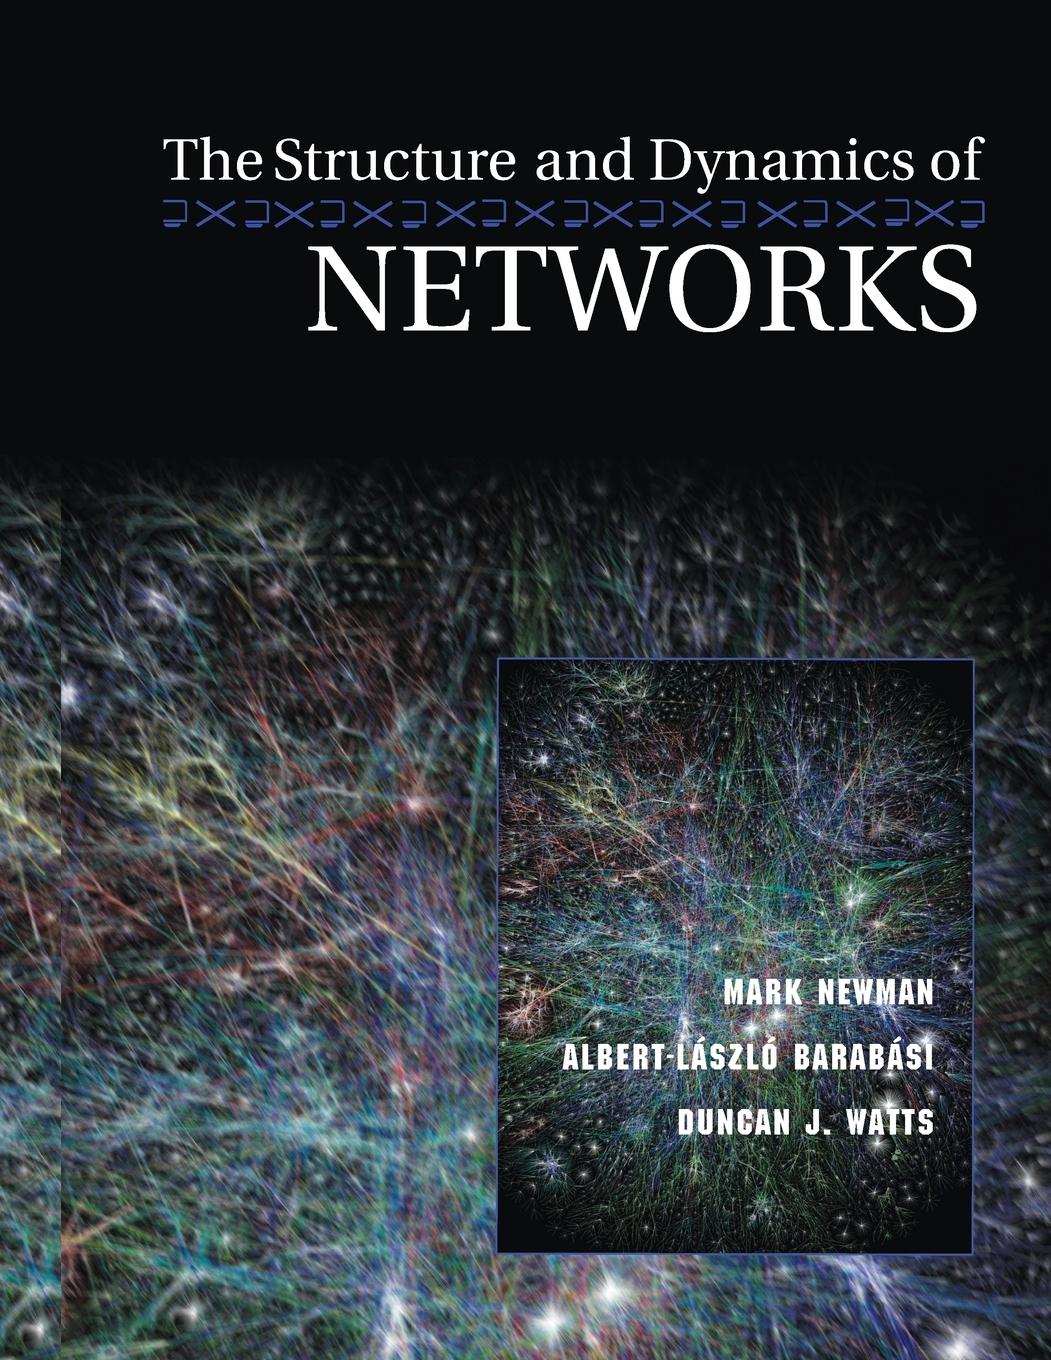 The Structure and Dynamics of Networks - Newman, Mark Barabasi, Albert-laszlo Watts, Duncan